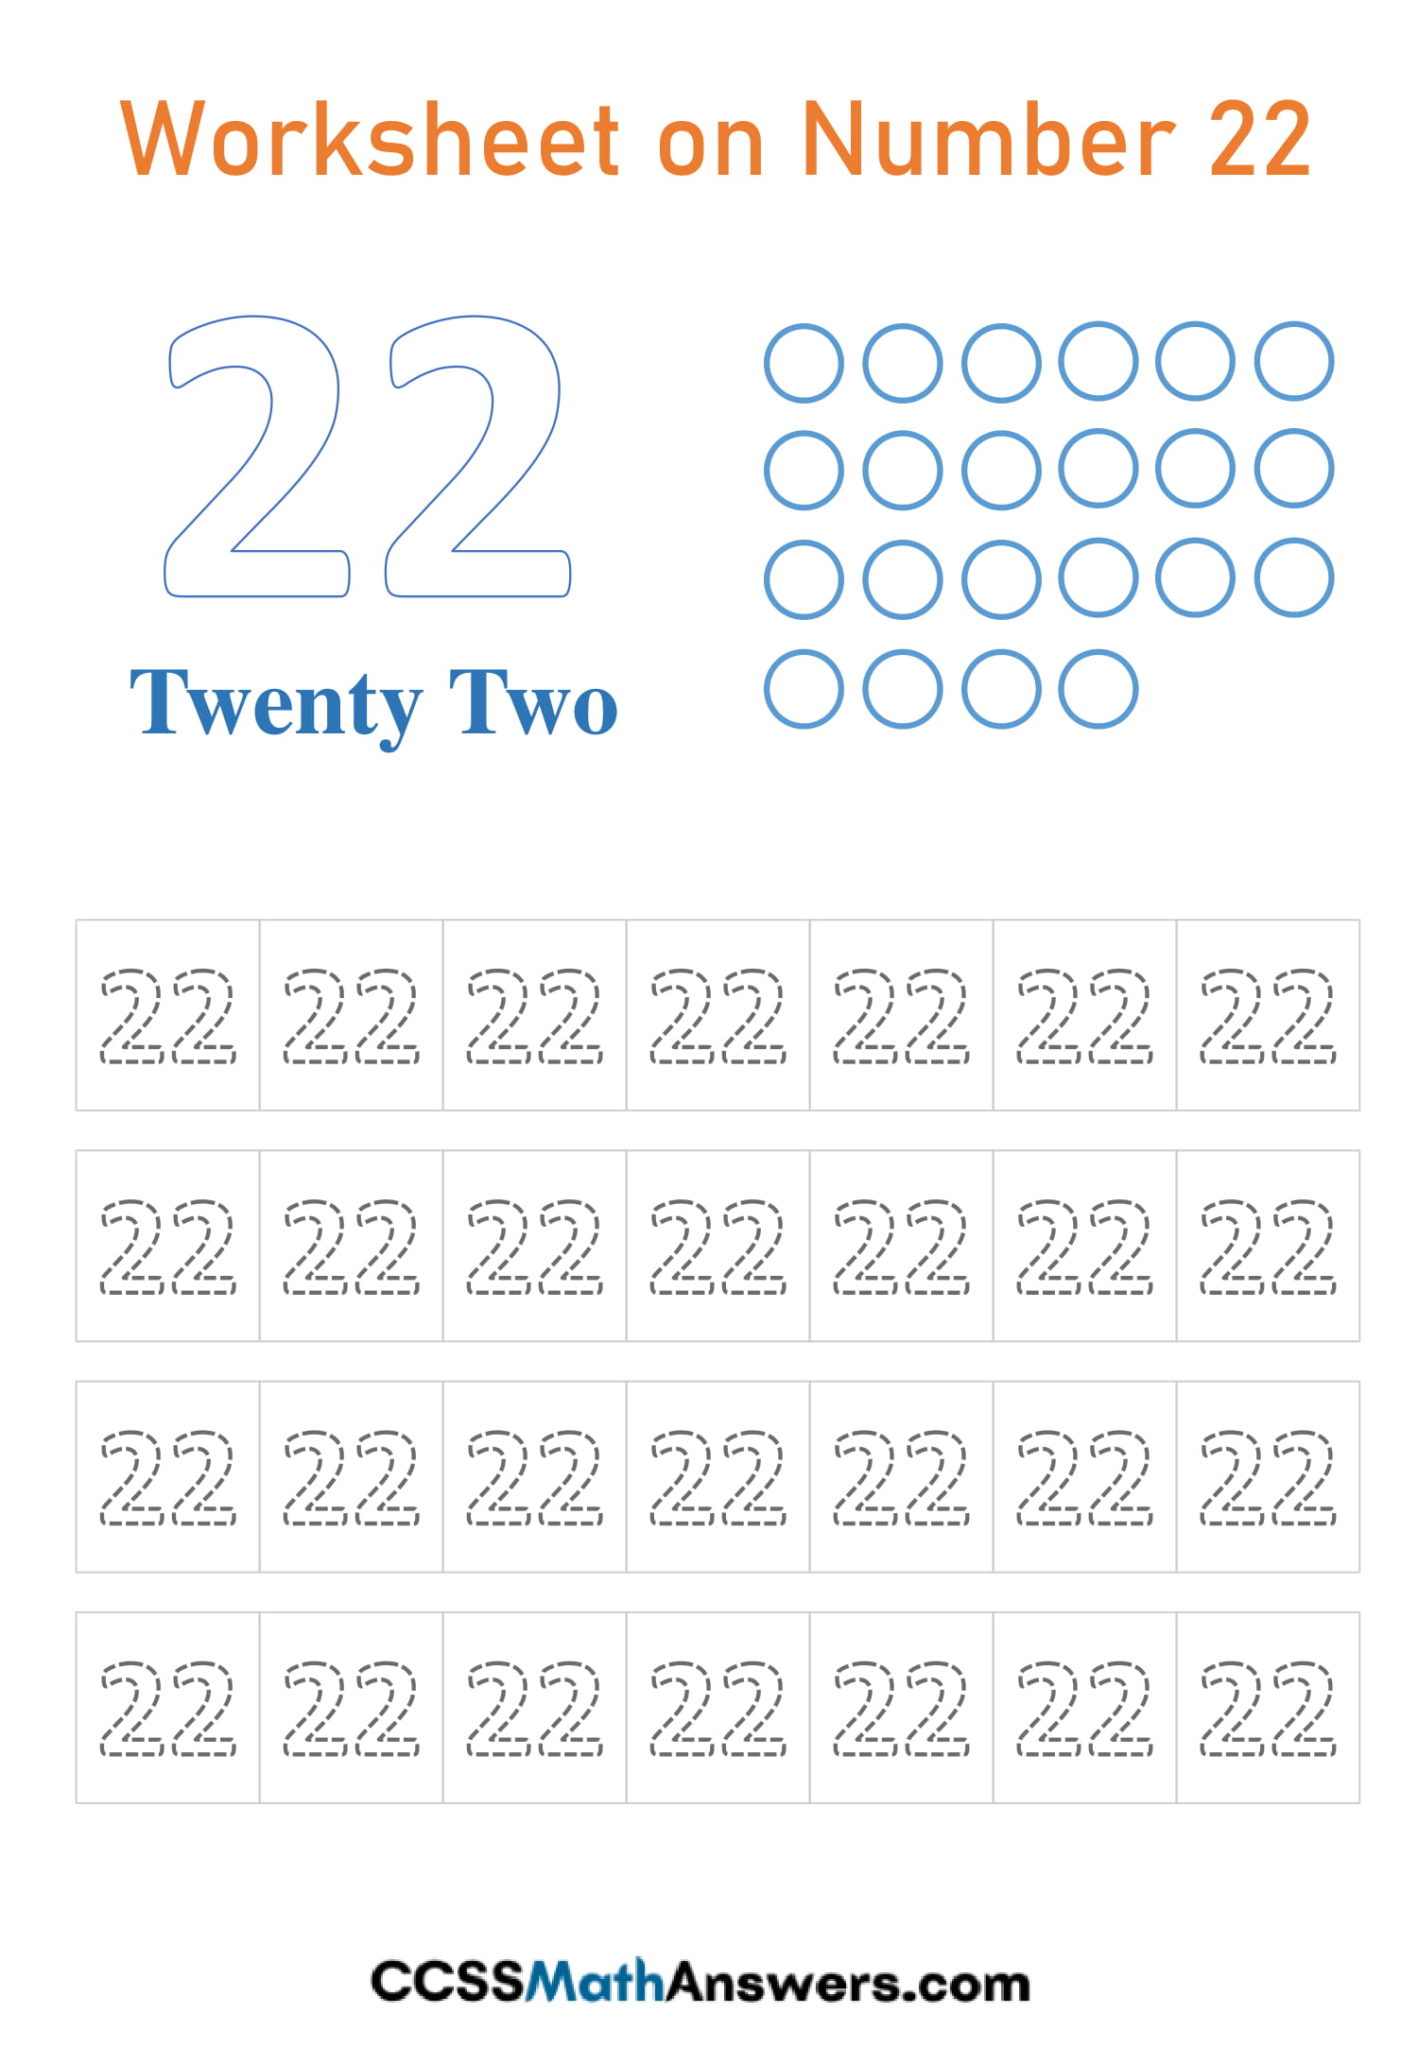 Worksheet On Number 22 Free Printable Number 22 Tracing Counting Activity Worksheets For